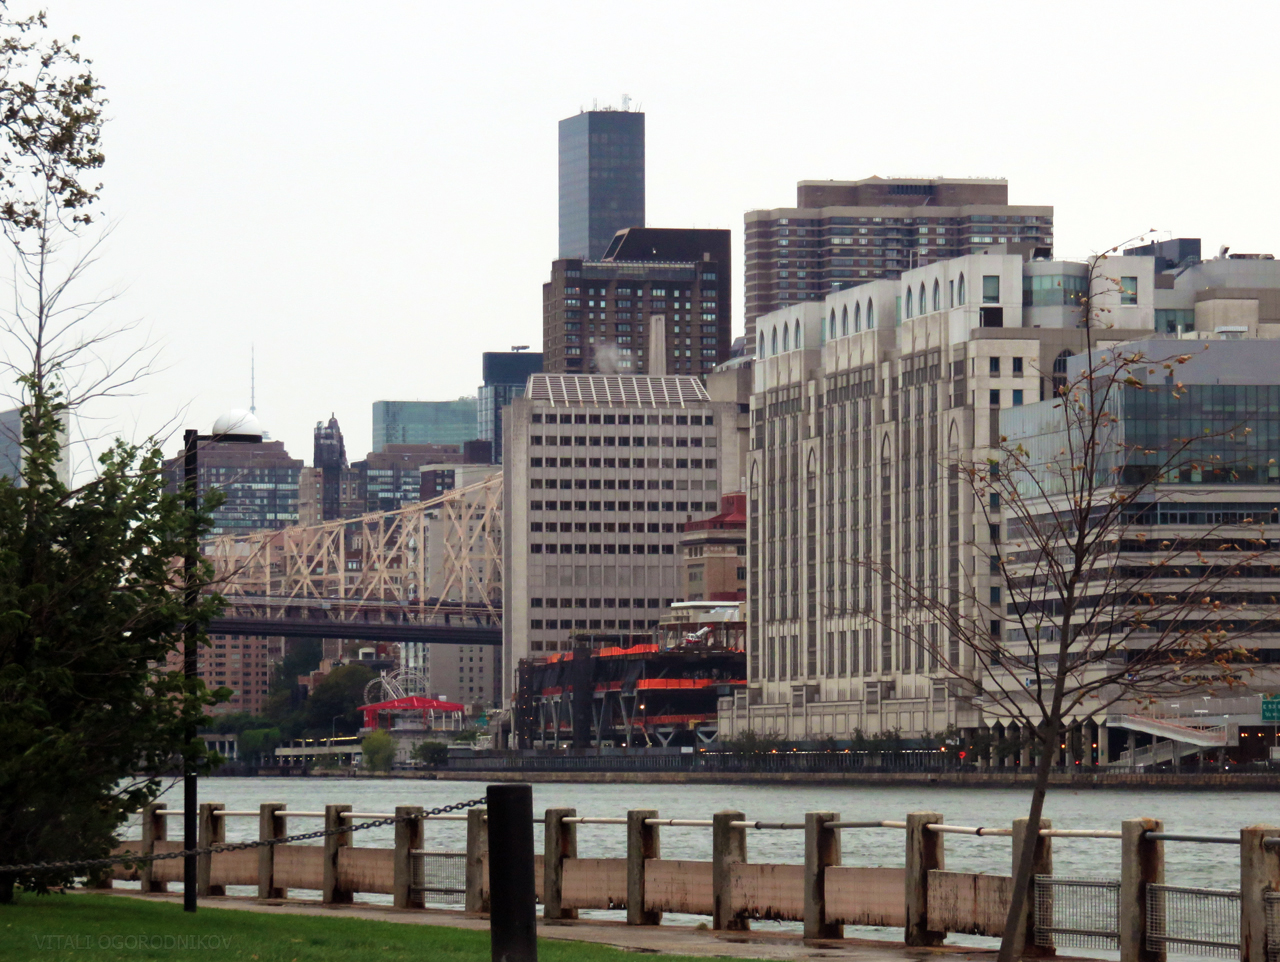 Rockefeller Research Building (center) fronts the new deck, with the Hospital for Special Surgery buildings (right). Looking southwest from Roosevelt Island.